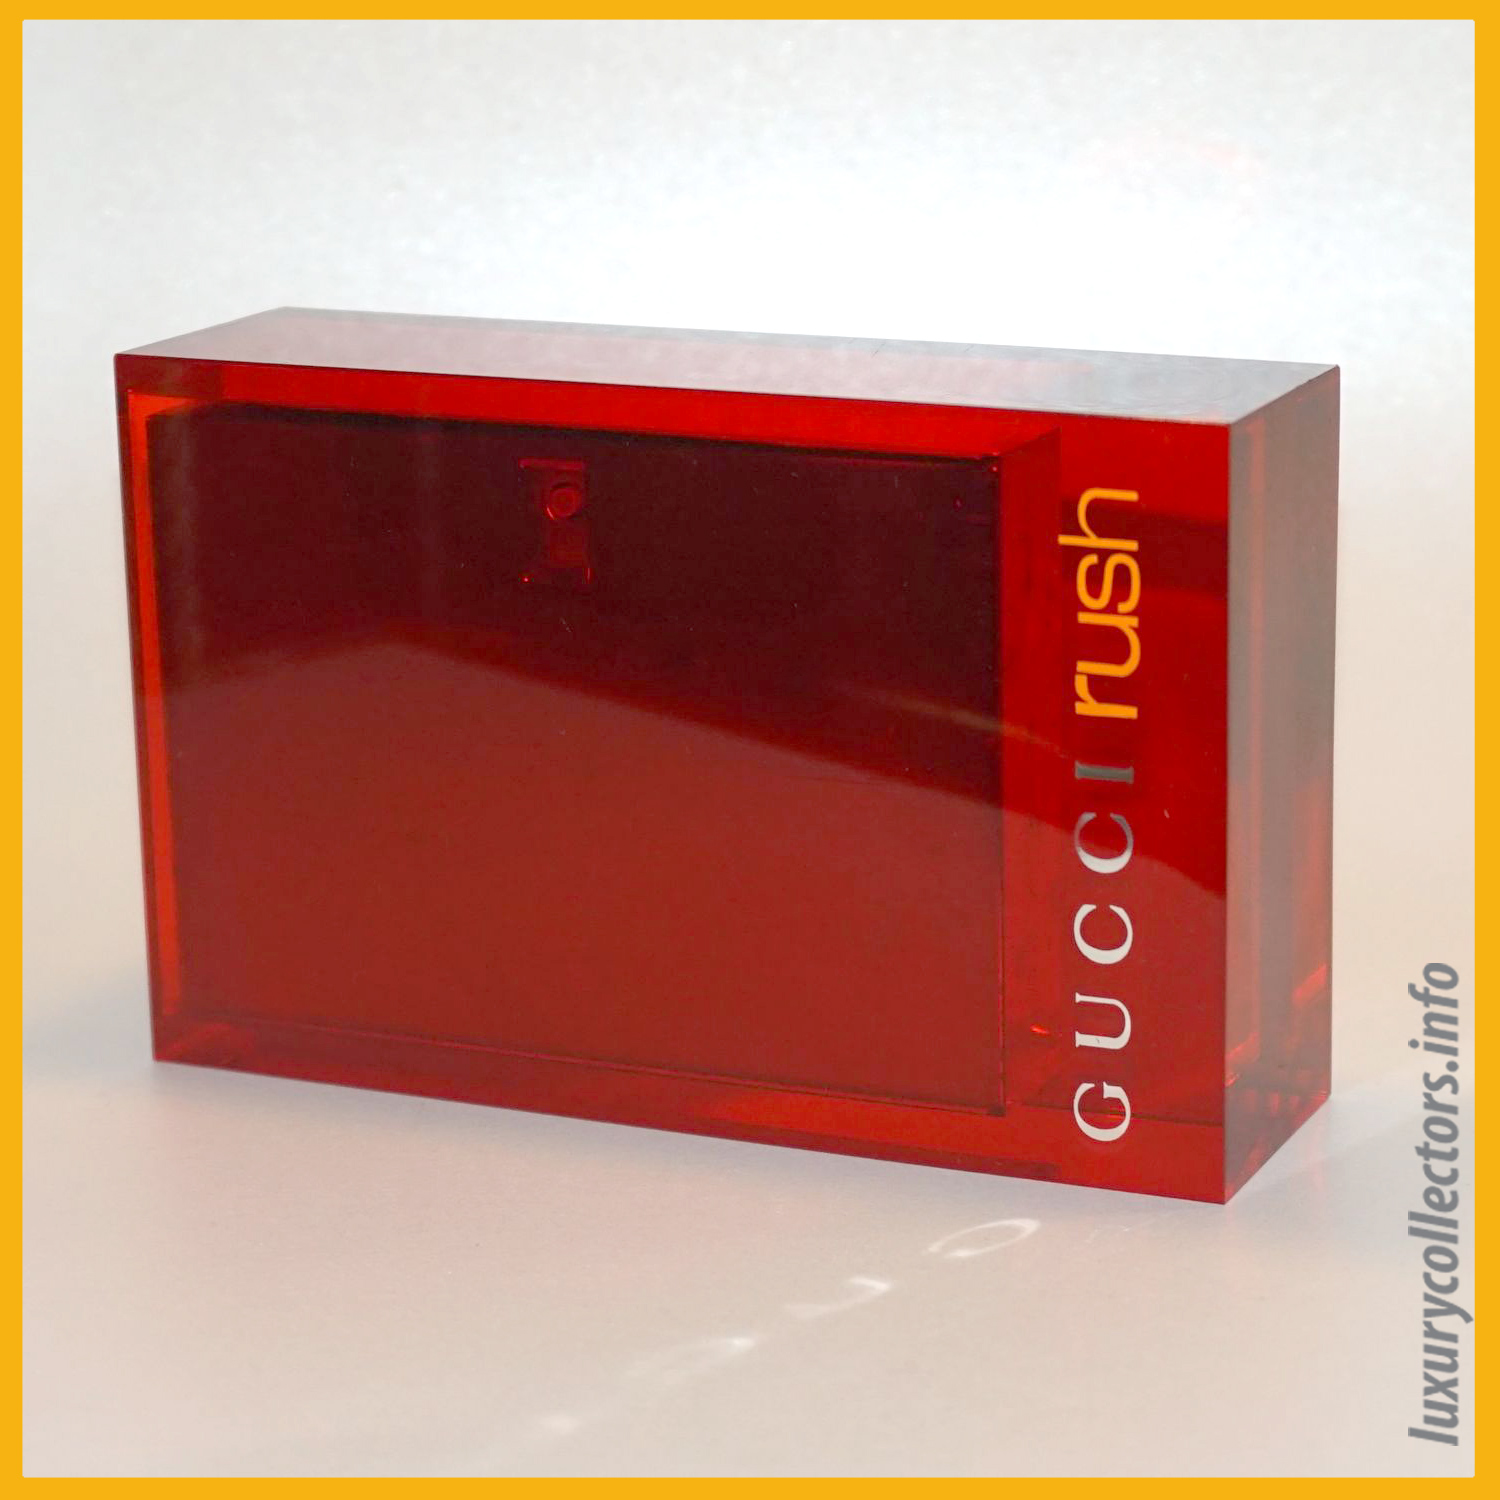 Gucci Tom Ford Italy Rush Perfume Bottle Limited Edition Millennium Parfum 1999 2000 Metal Container Acrylic Sleeve Closed Inside